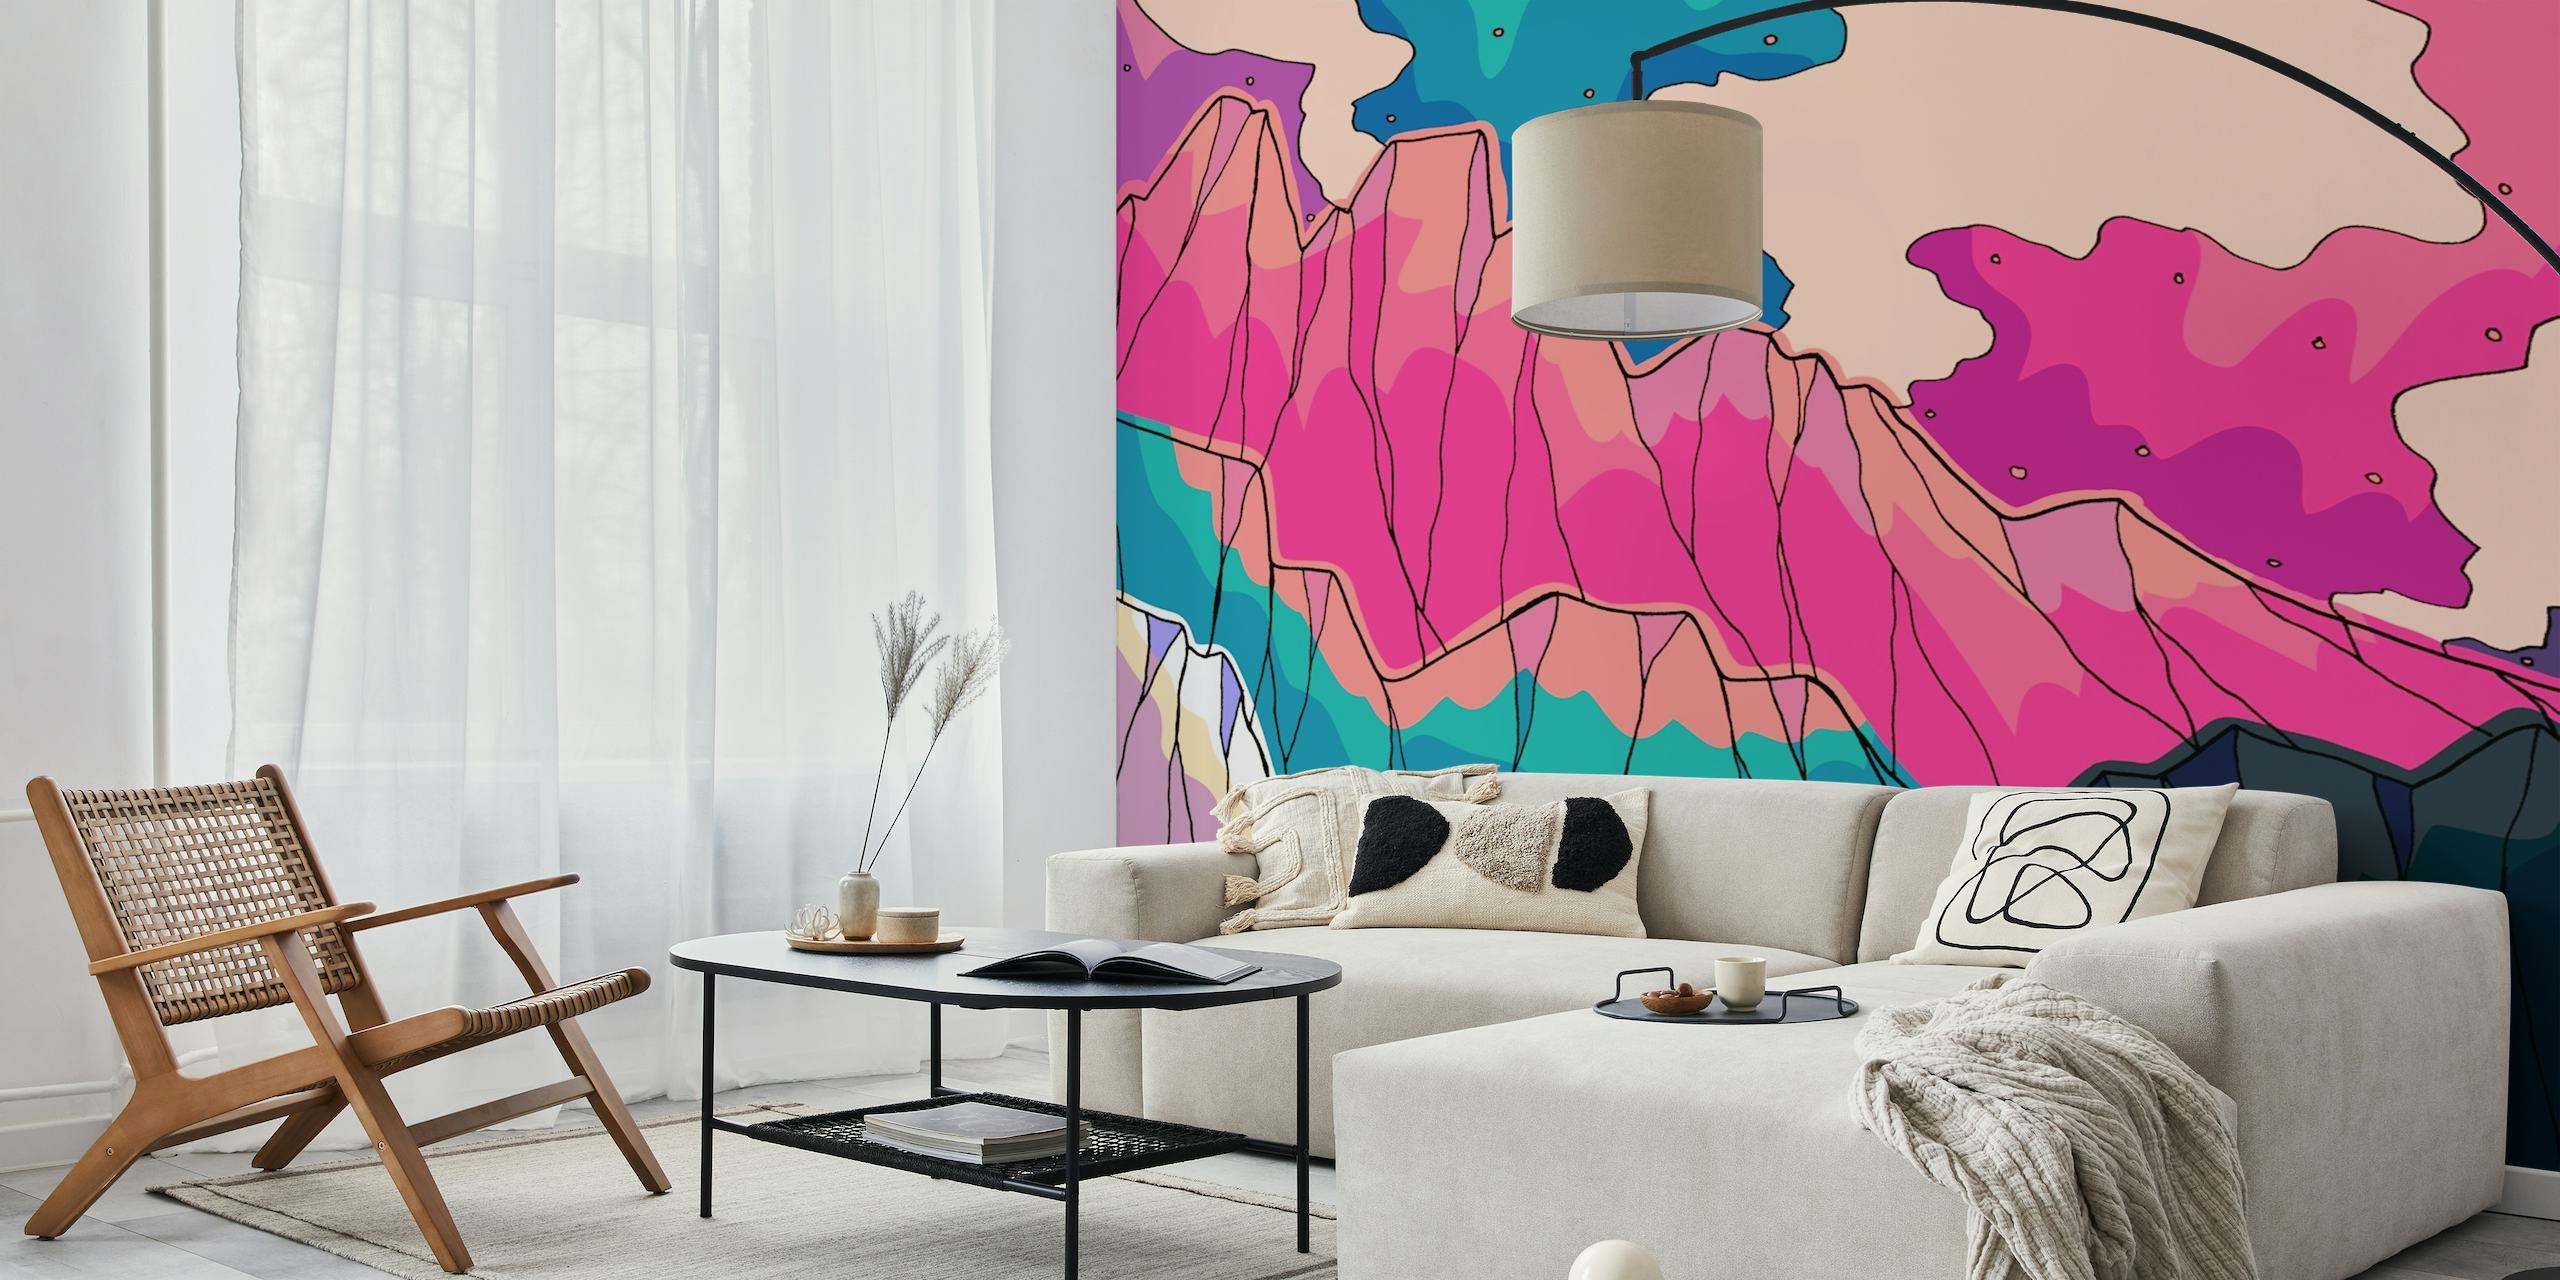 Abstract mountain range wall mural with layers of pink, blue, and purple hues